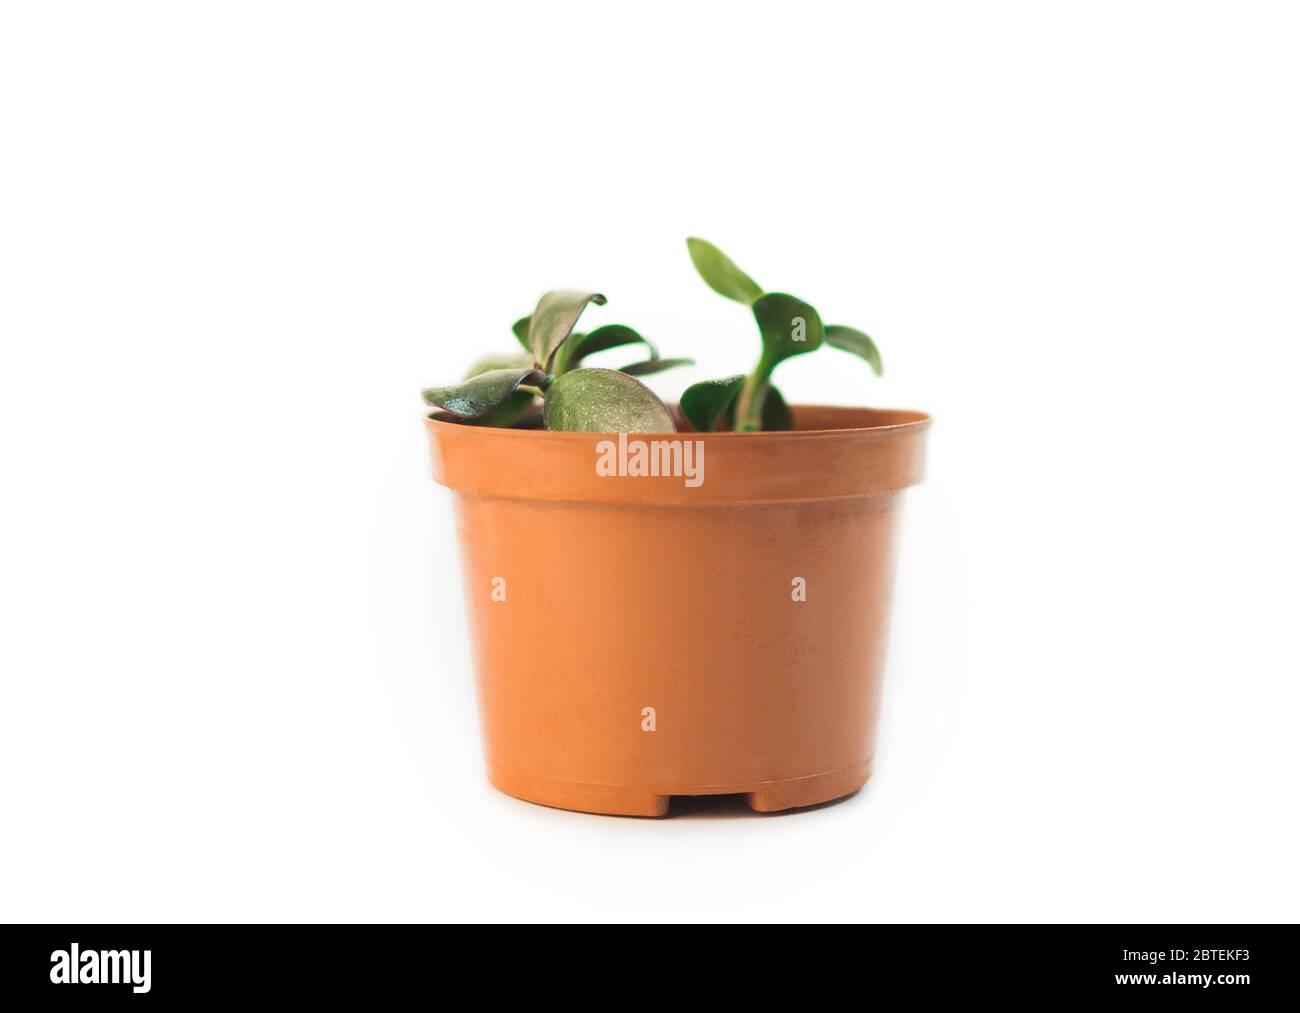 Juicy crassula in a pot on a white background, isolate. Stylish and simple plants for a modern desk. Succulent African plant. Stock Photo